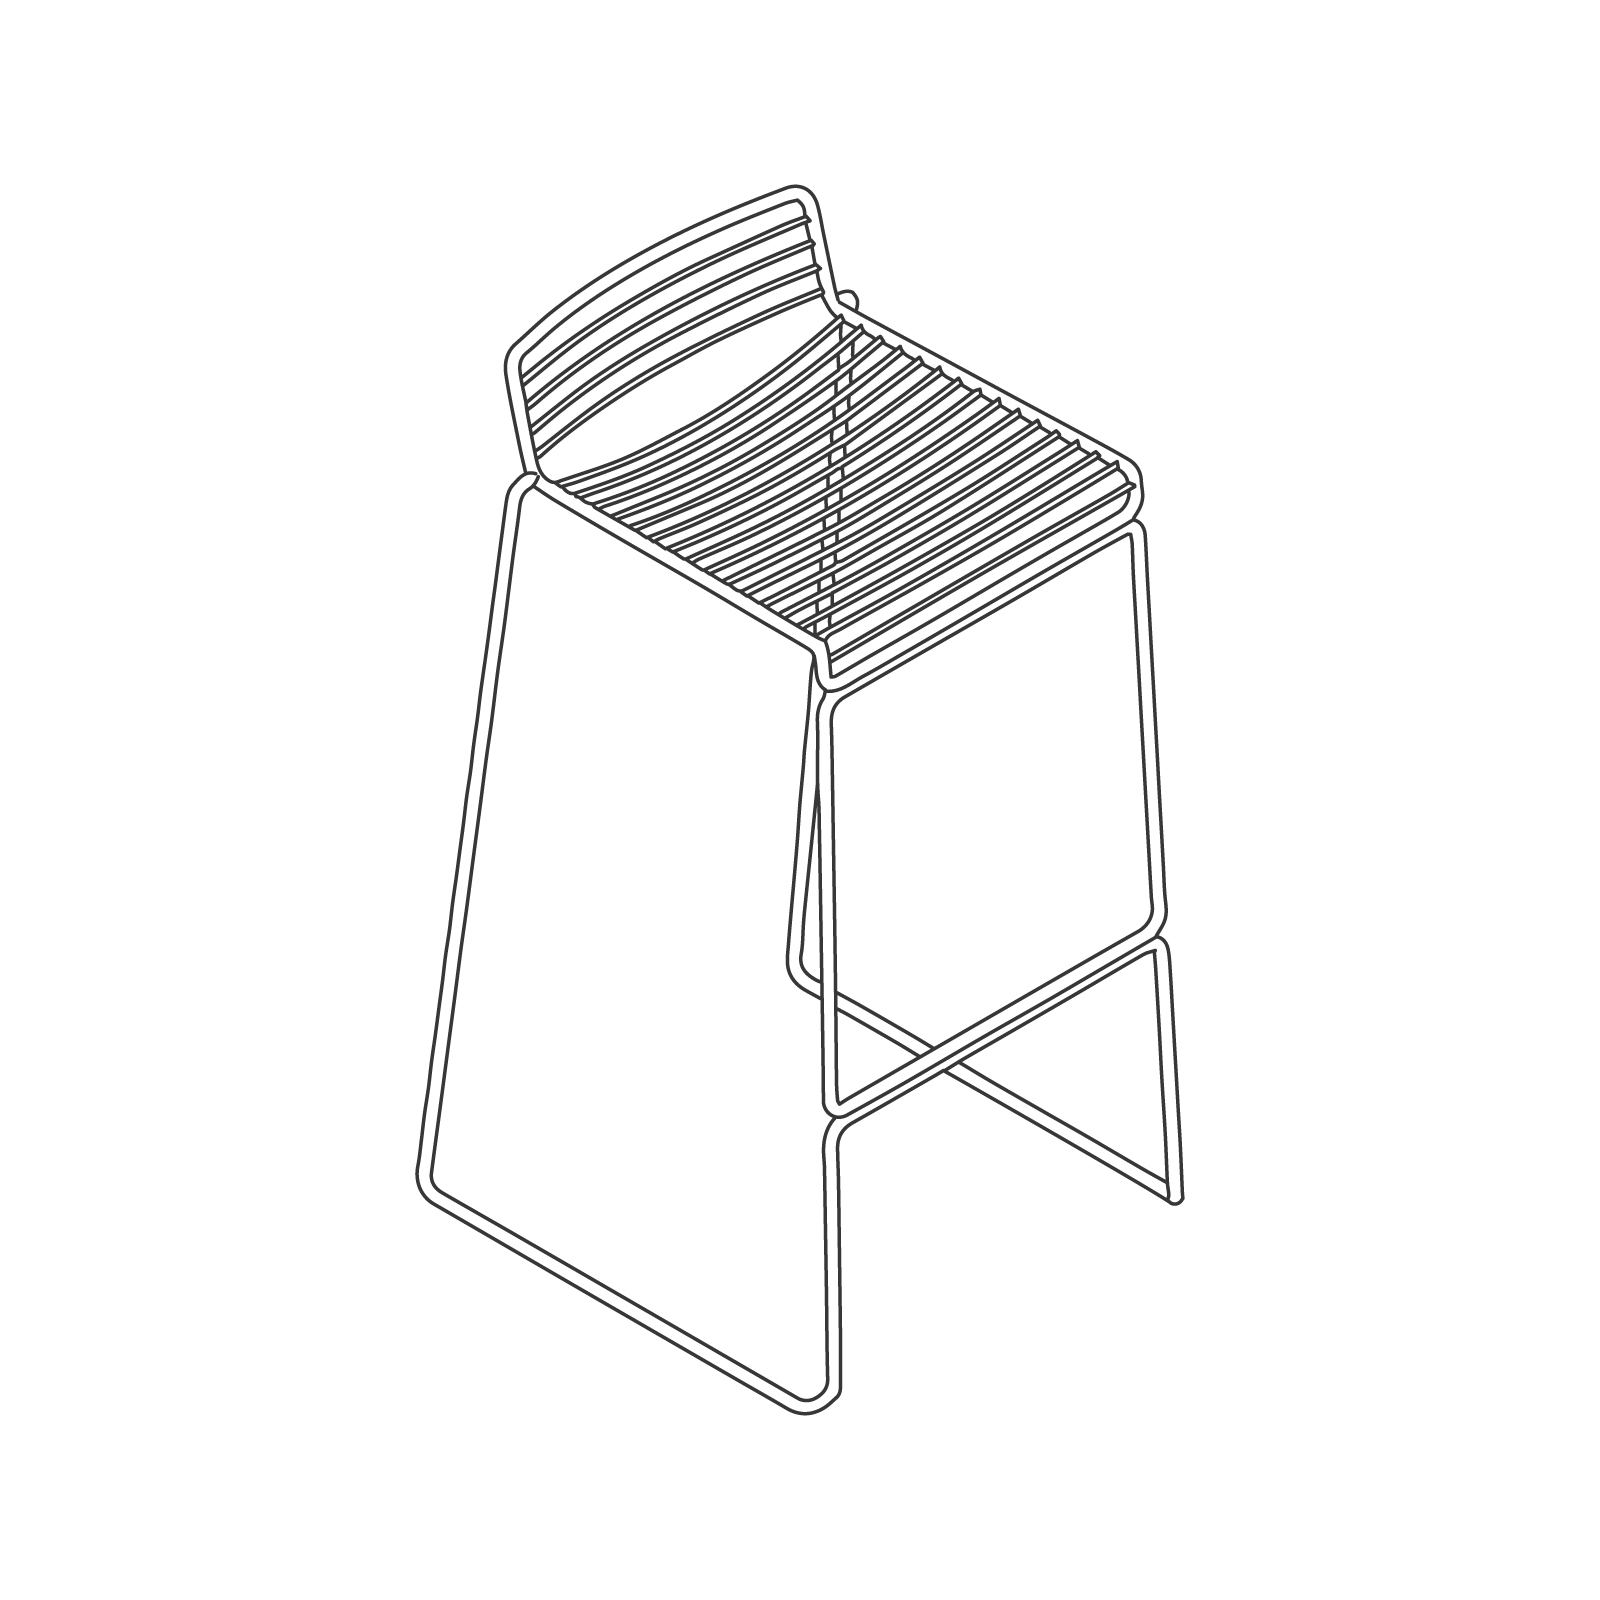 A line drawing - Hee Stool